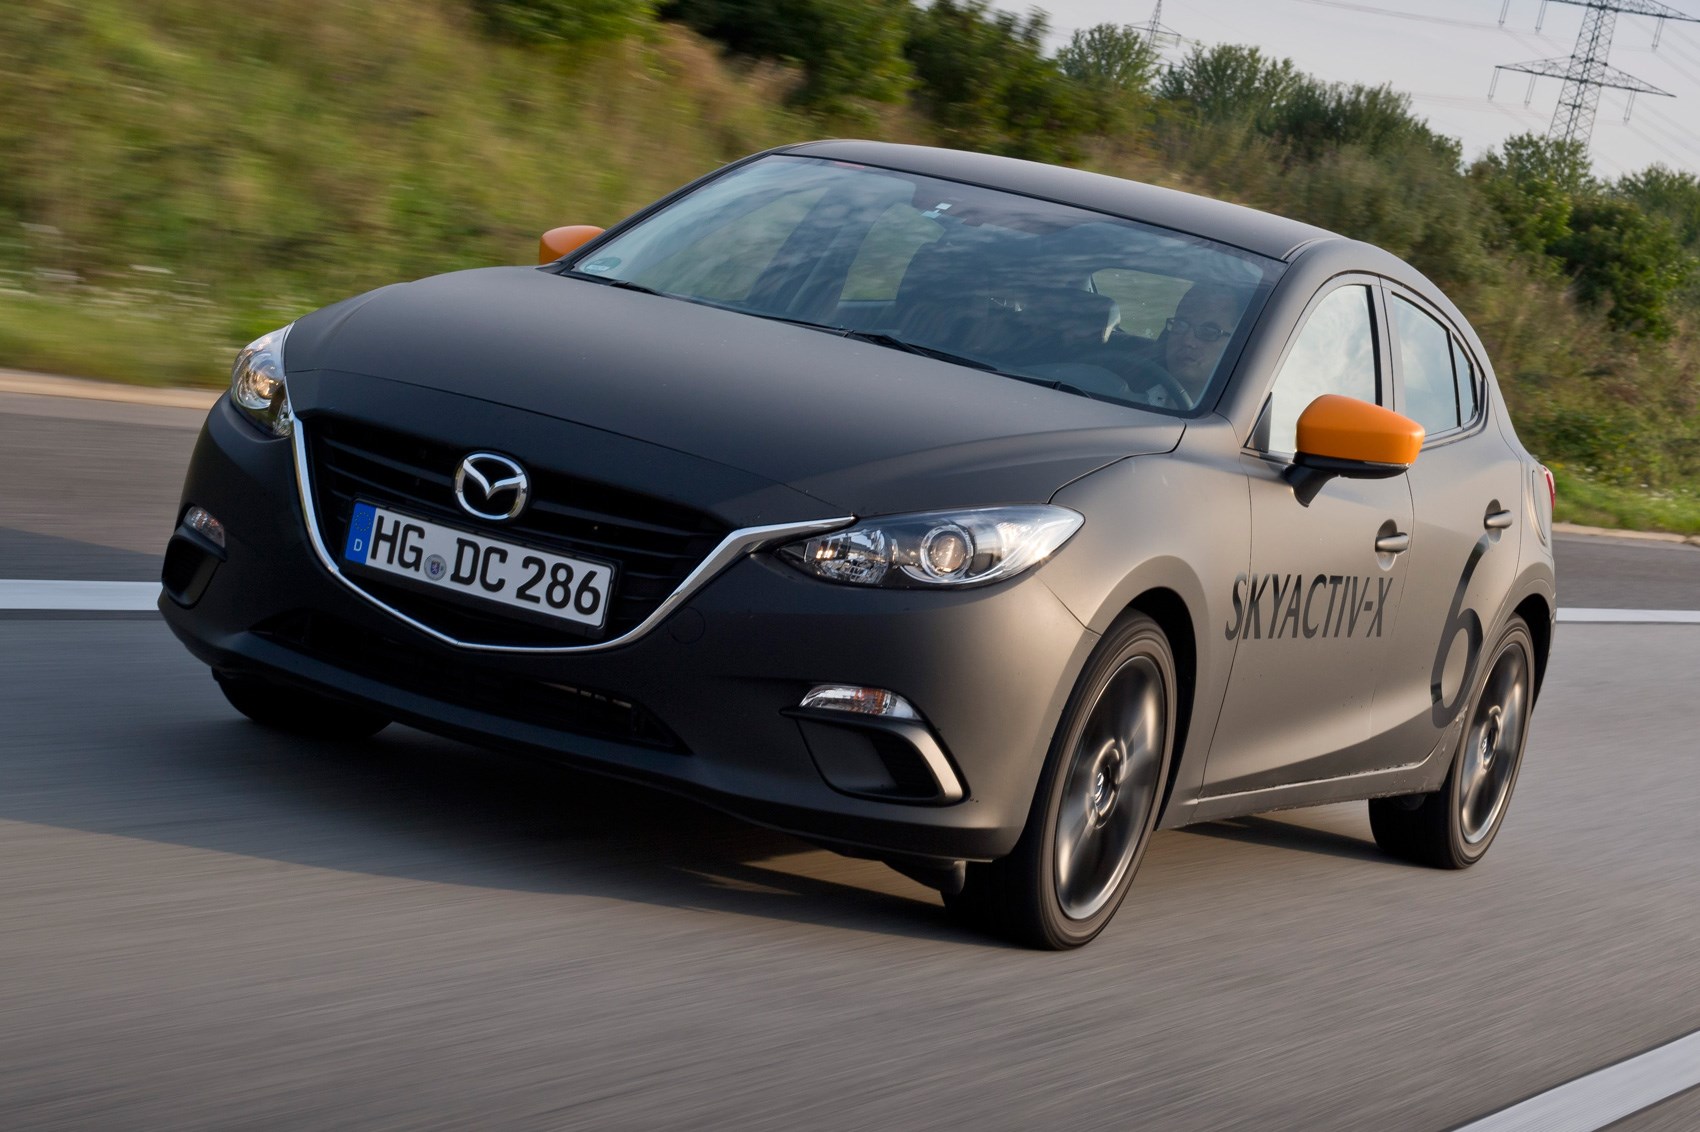 The petrol engine that thinks it's a diesel: how Mazda's